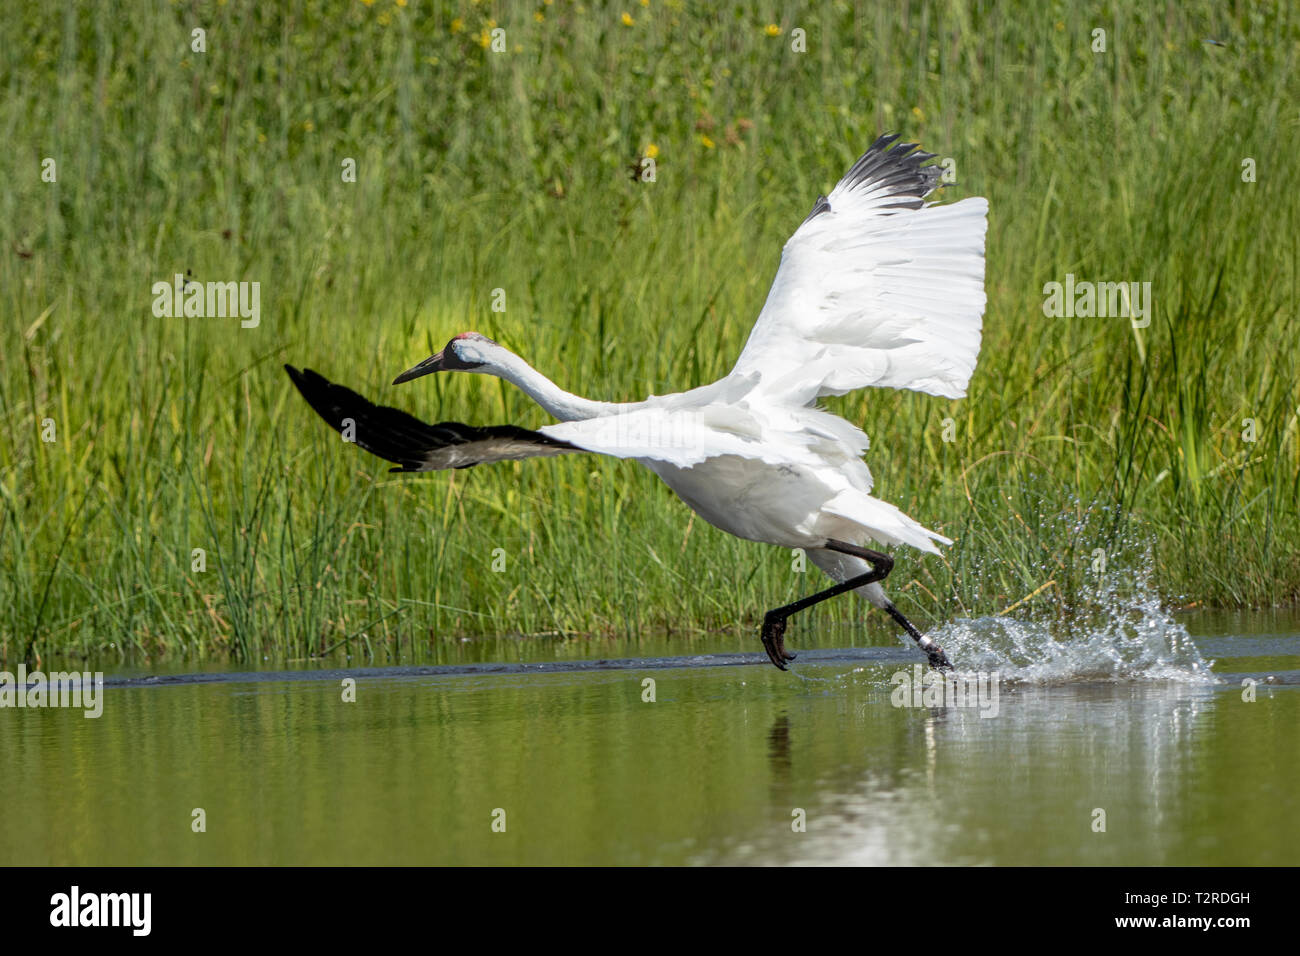 Whooping Crane trying to fly Stock Photo